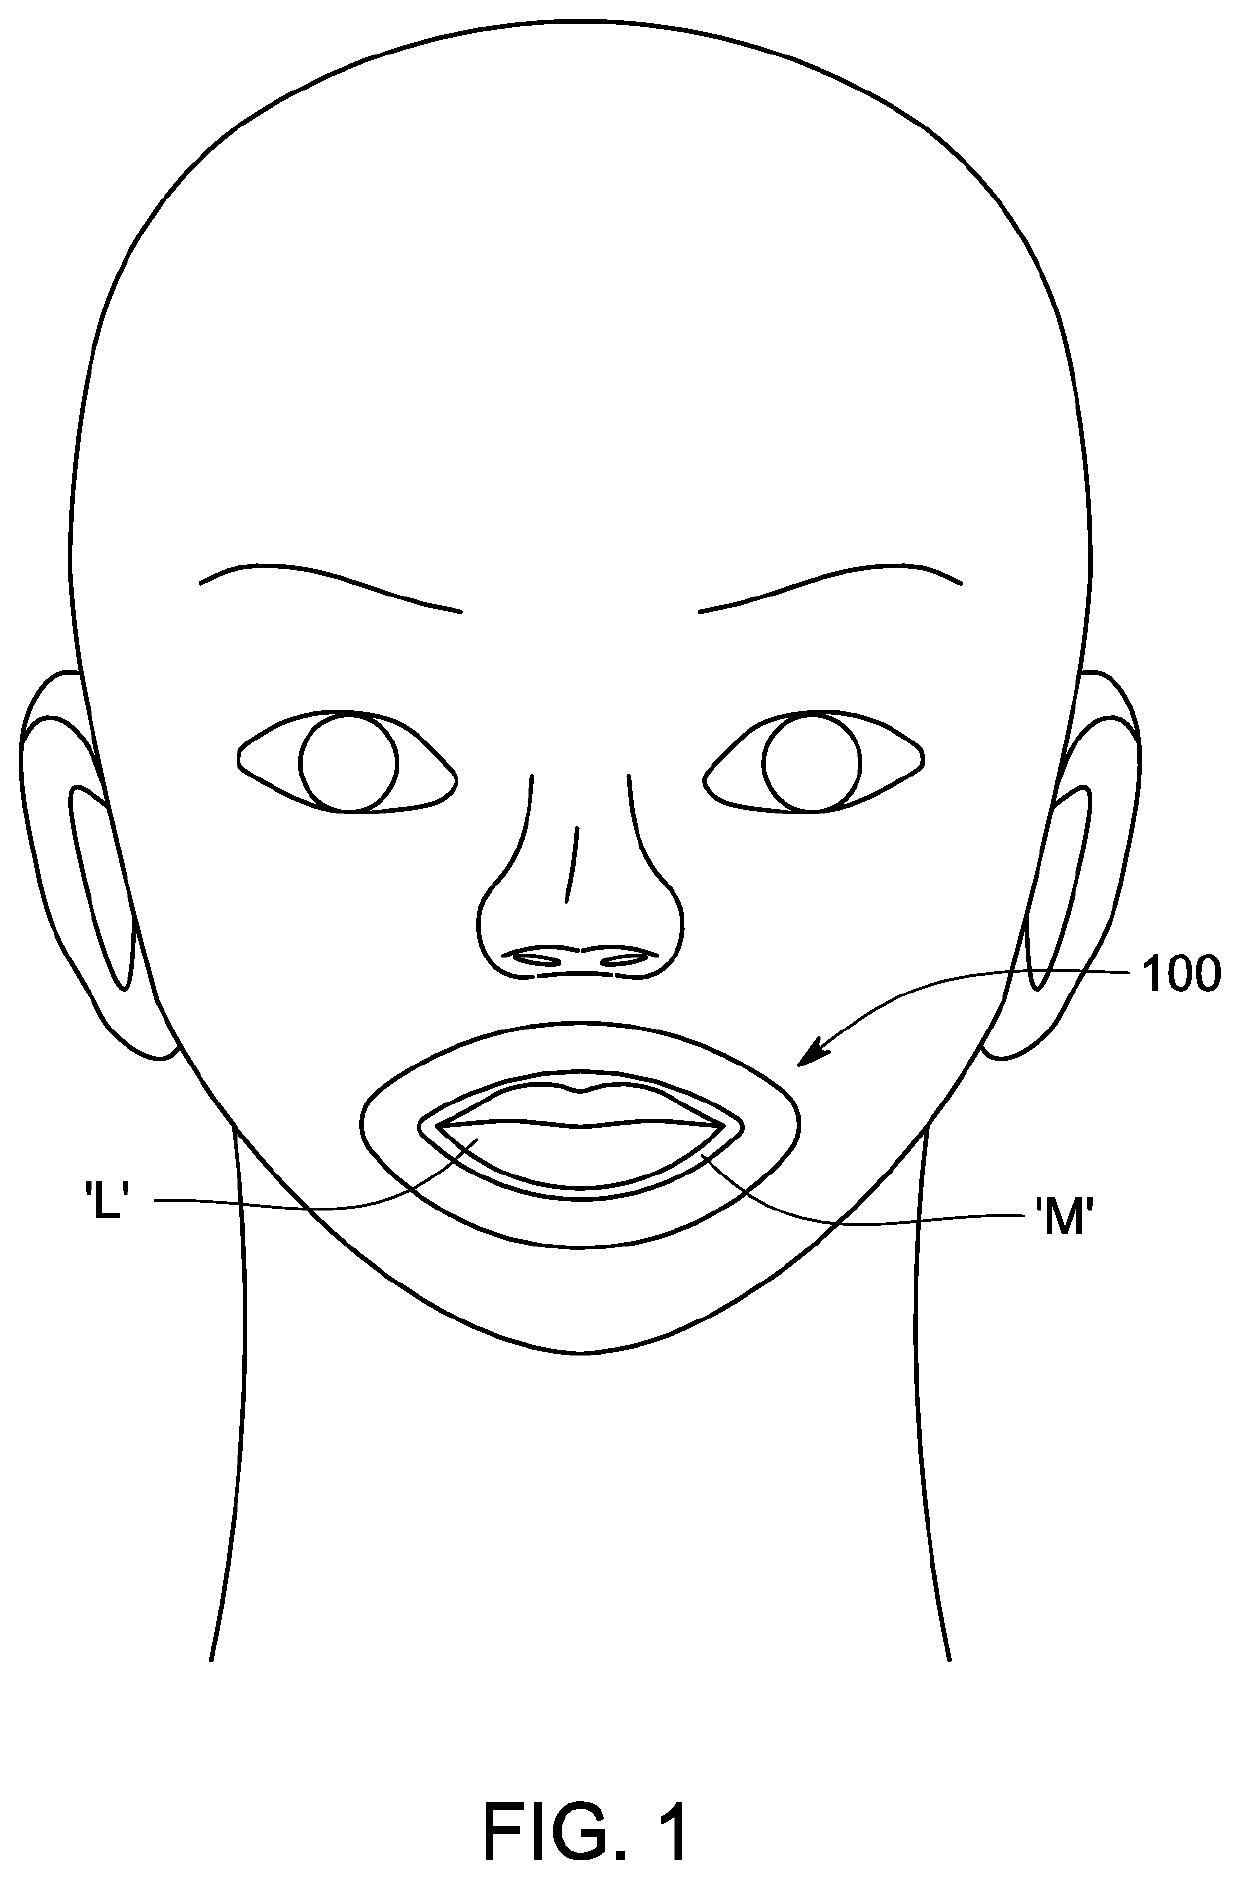 Nasal breathing training tape and methodfield of the invention